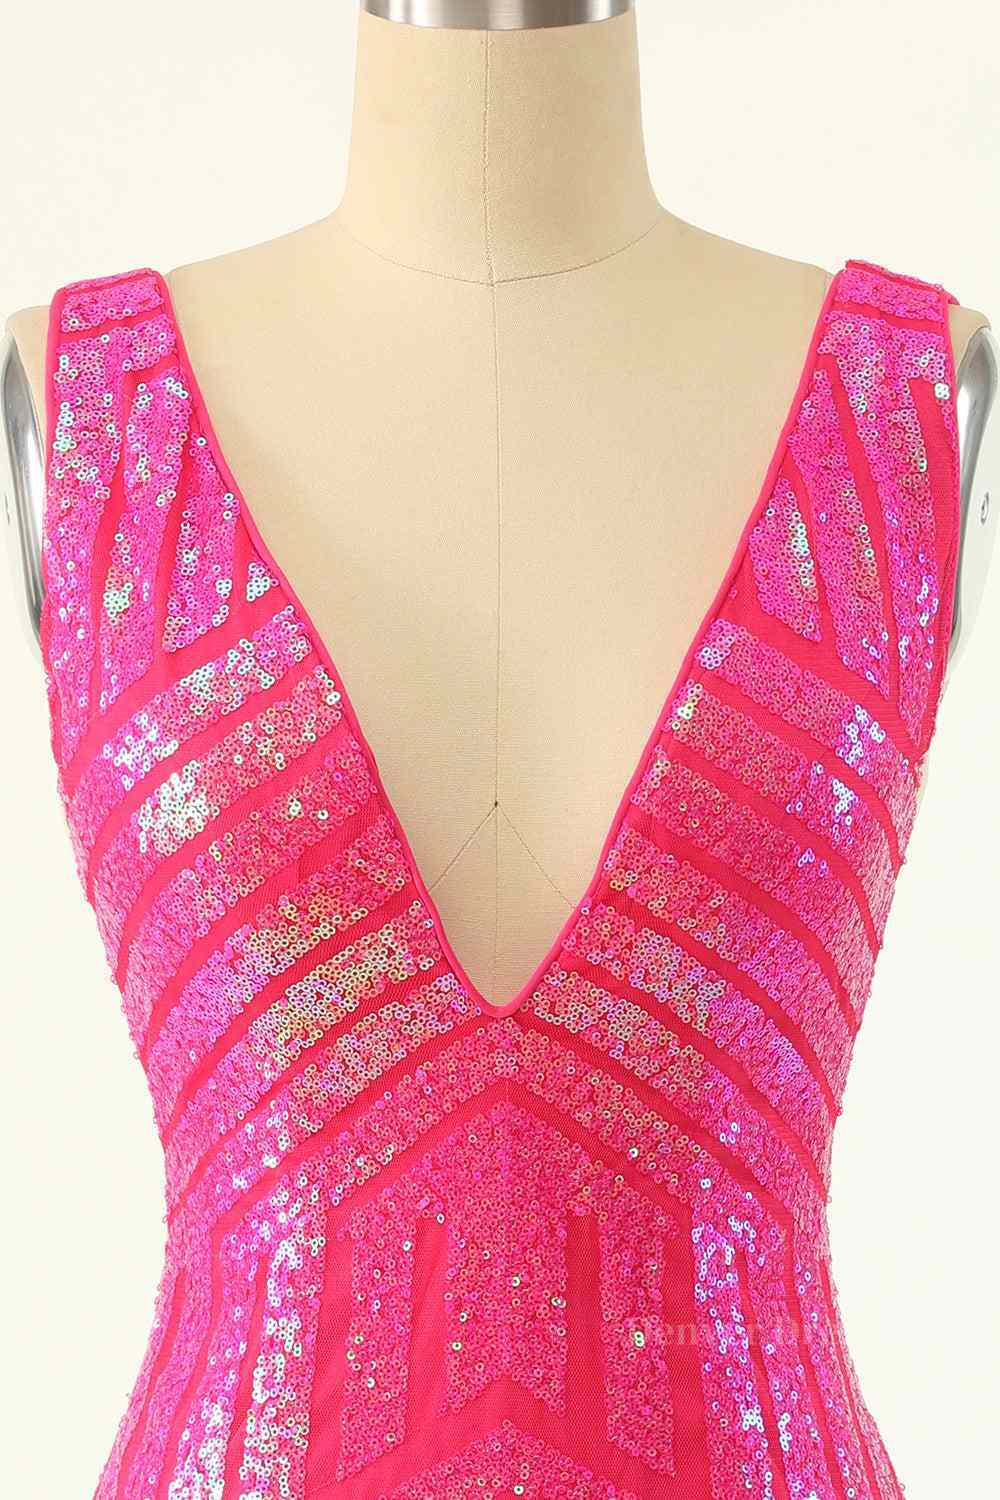 Prom Dress Cheap, Hot Pink Sheath V Neck Sequin-Embroidered Mini Homecoming Dress